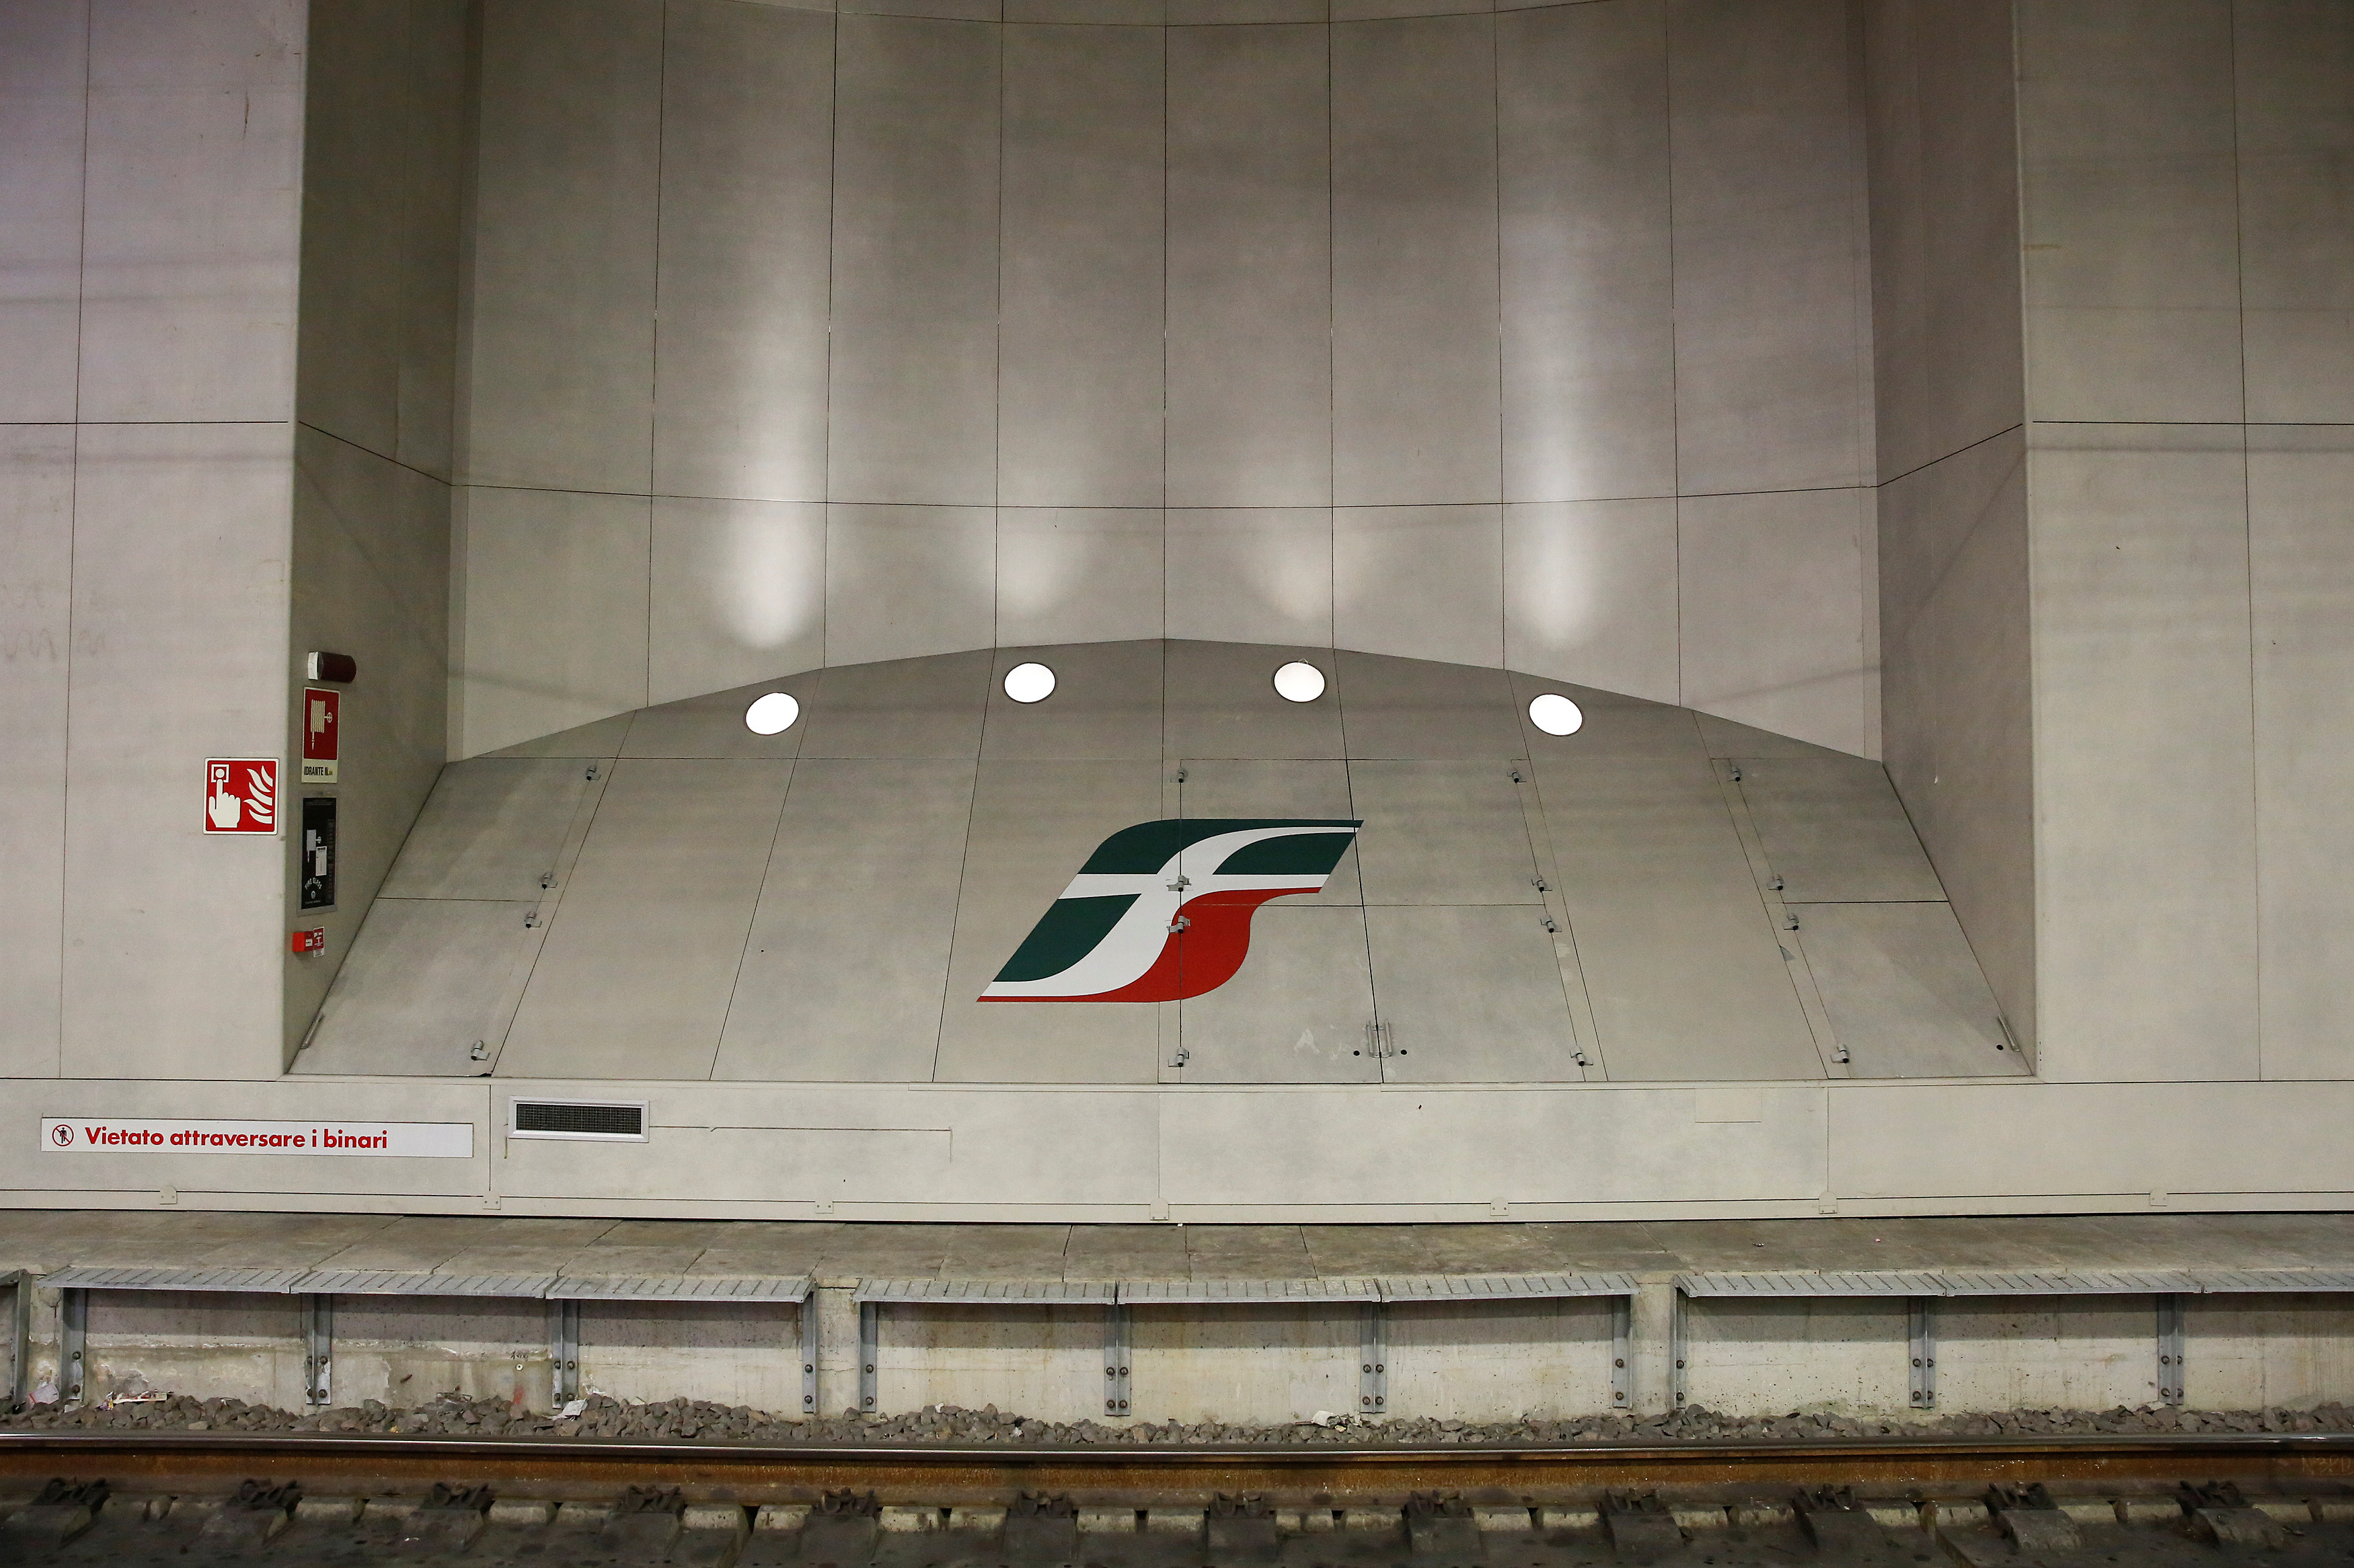 An Italian railway group Ferrovie dello Stato logo is seen at the Bologna Central Station